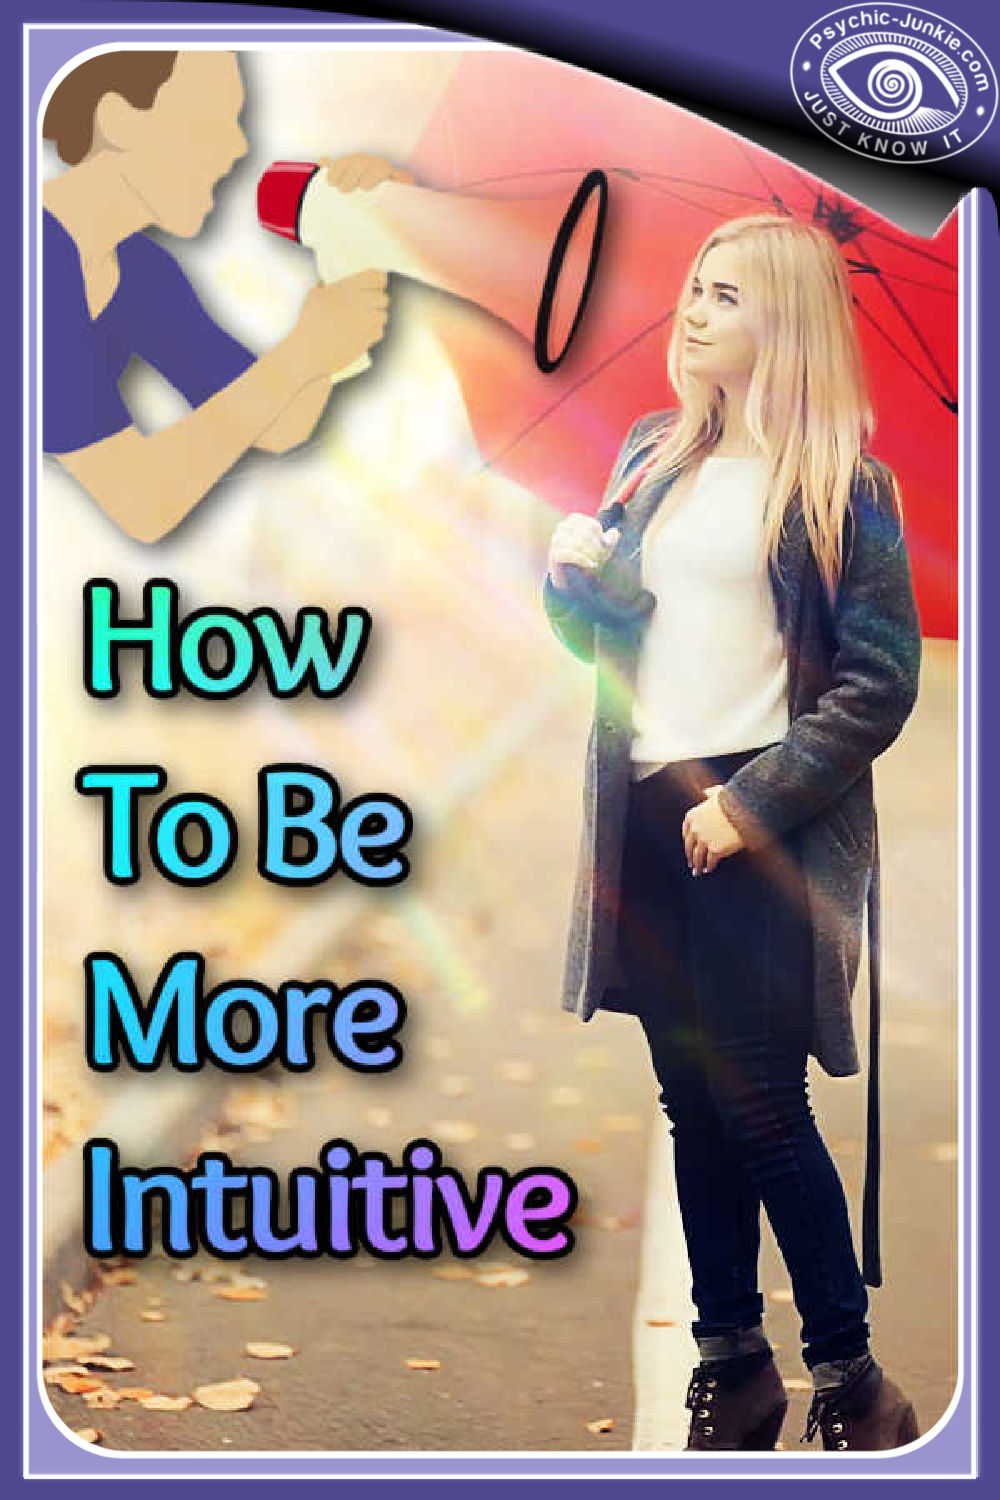 Learn how to be more intuitive